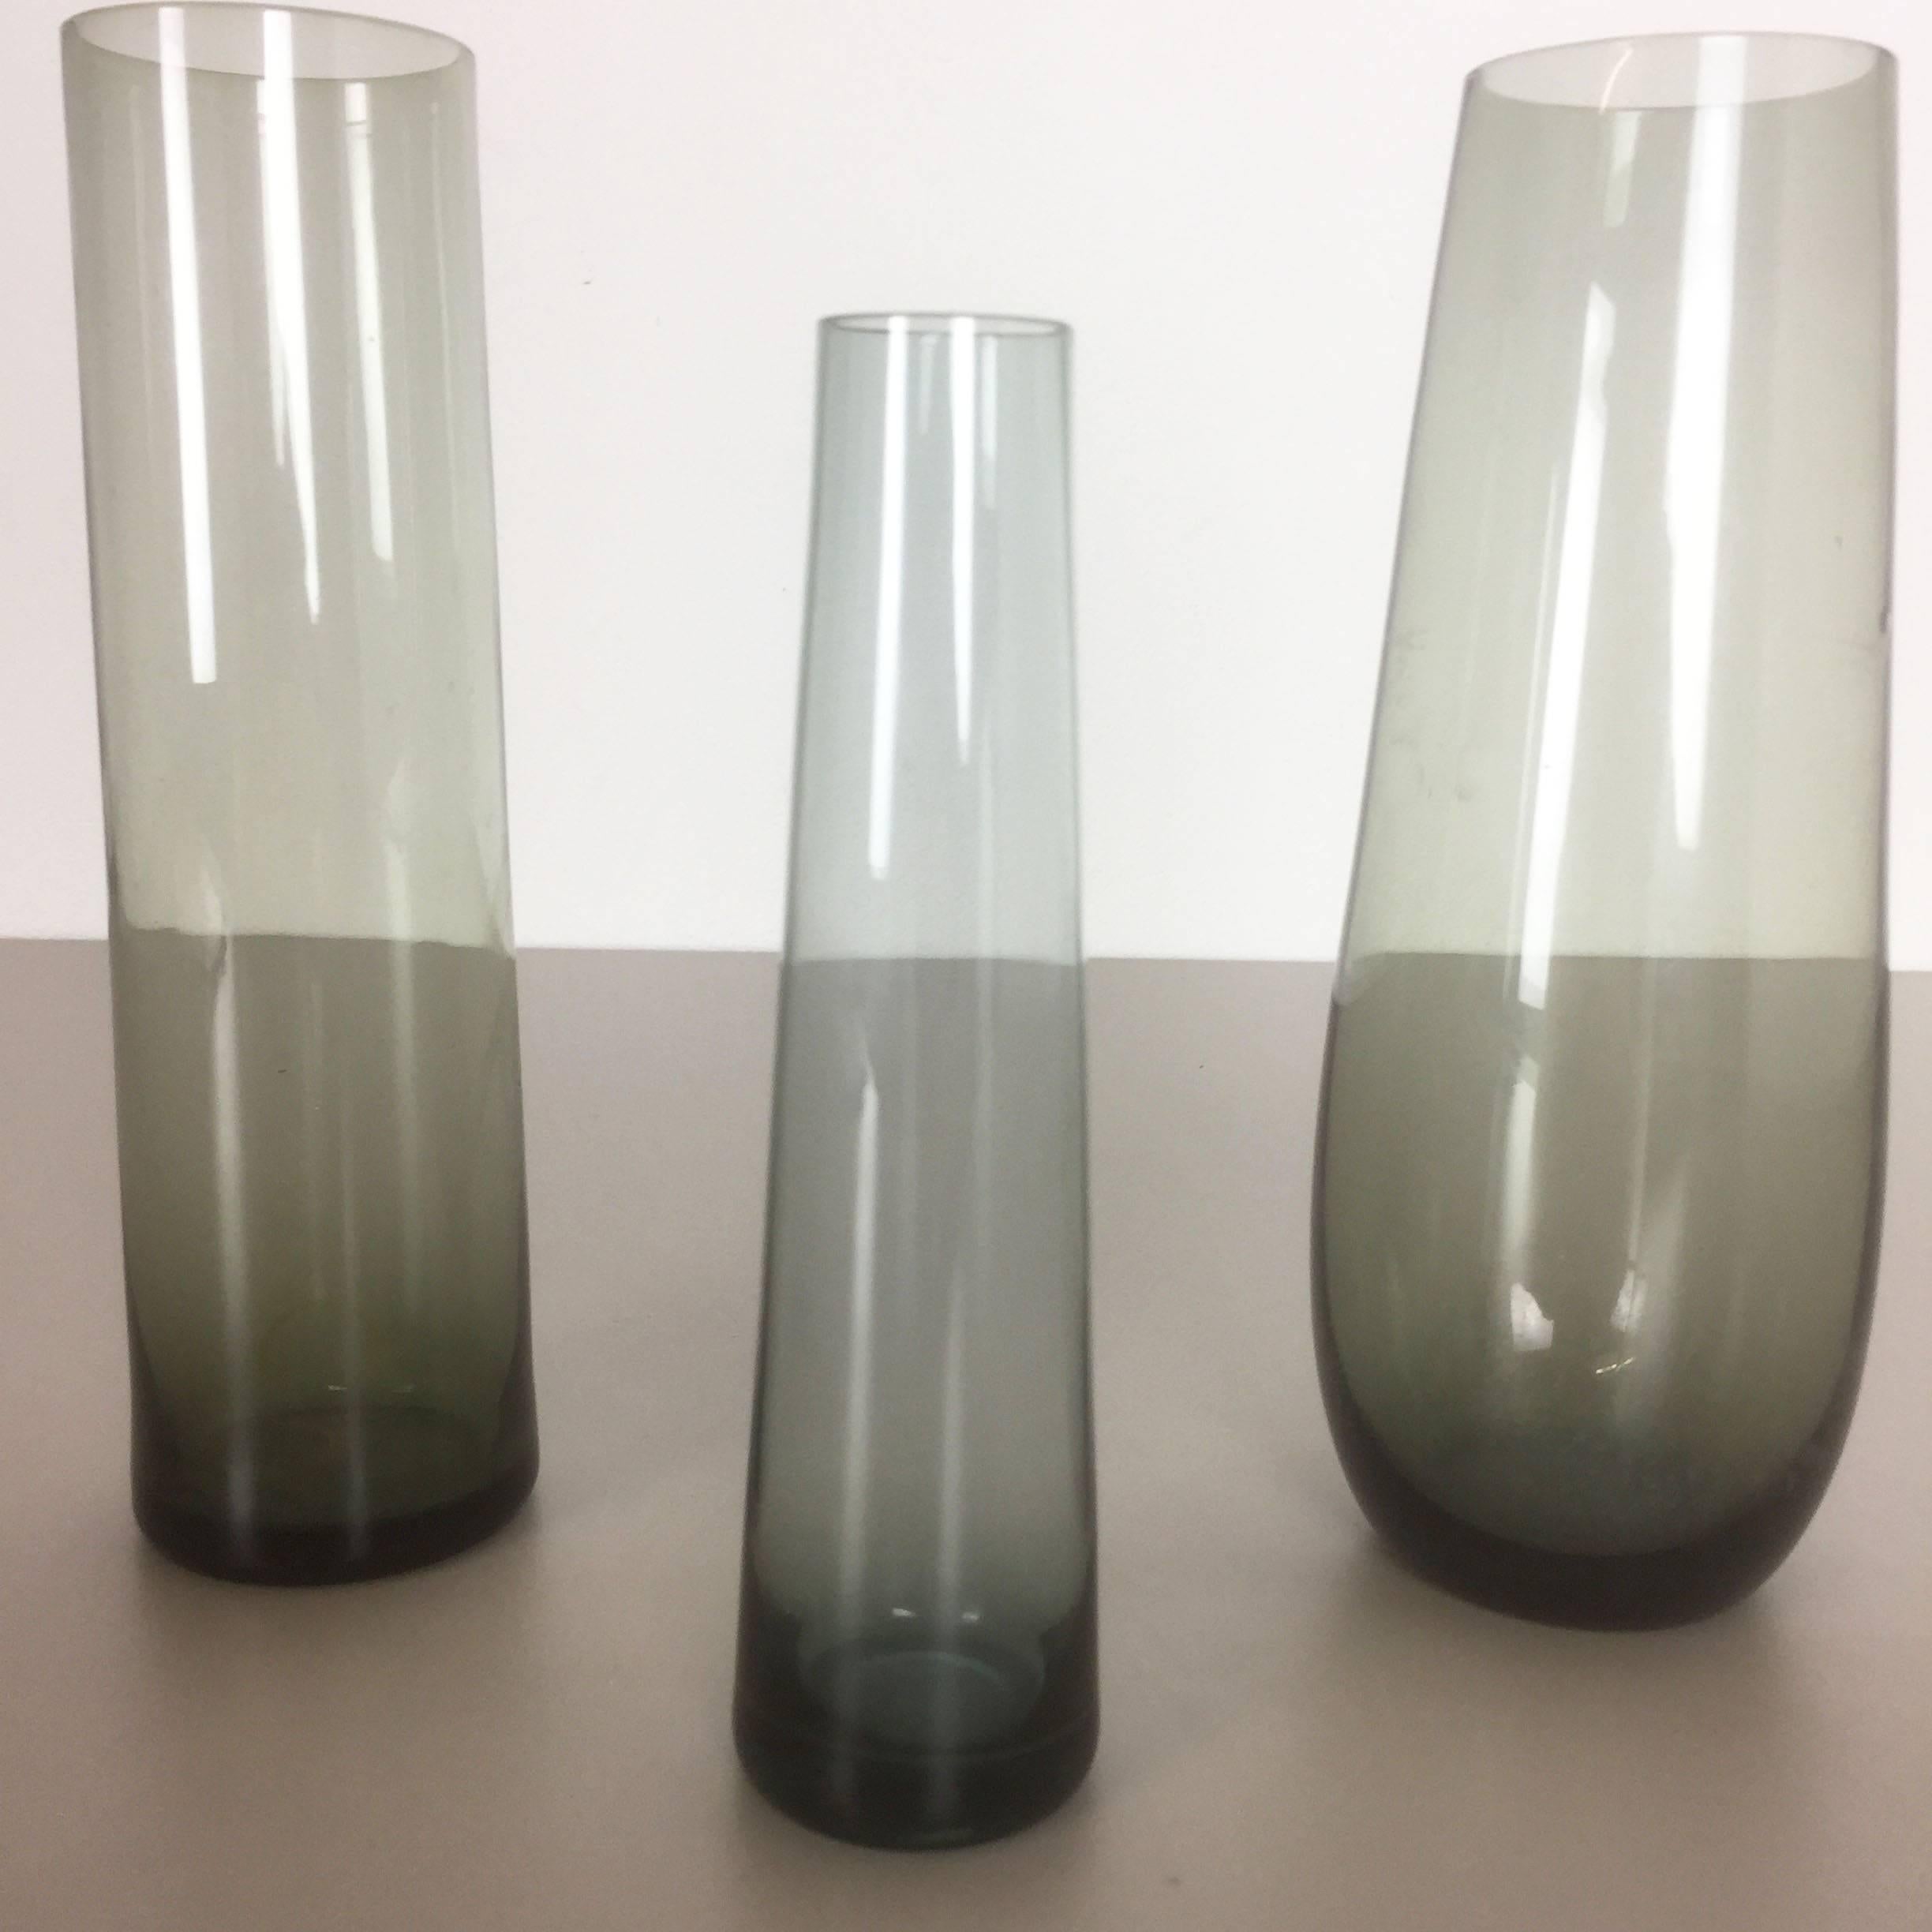 Vintage 1960s Set of Three Turmalin Vases by Wilhelm Wagenfeld for WMF, Germany For Sale 1